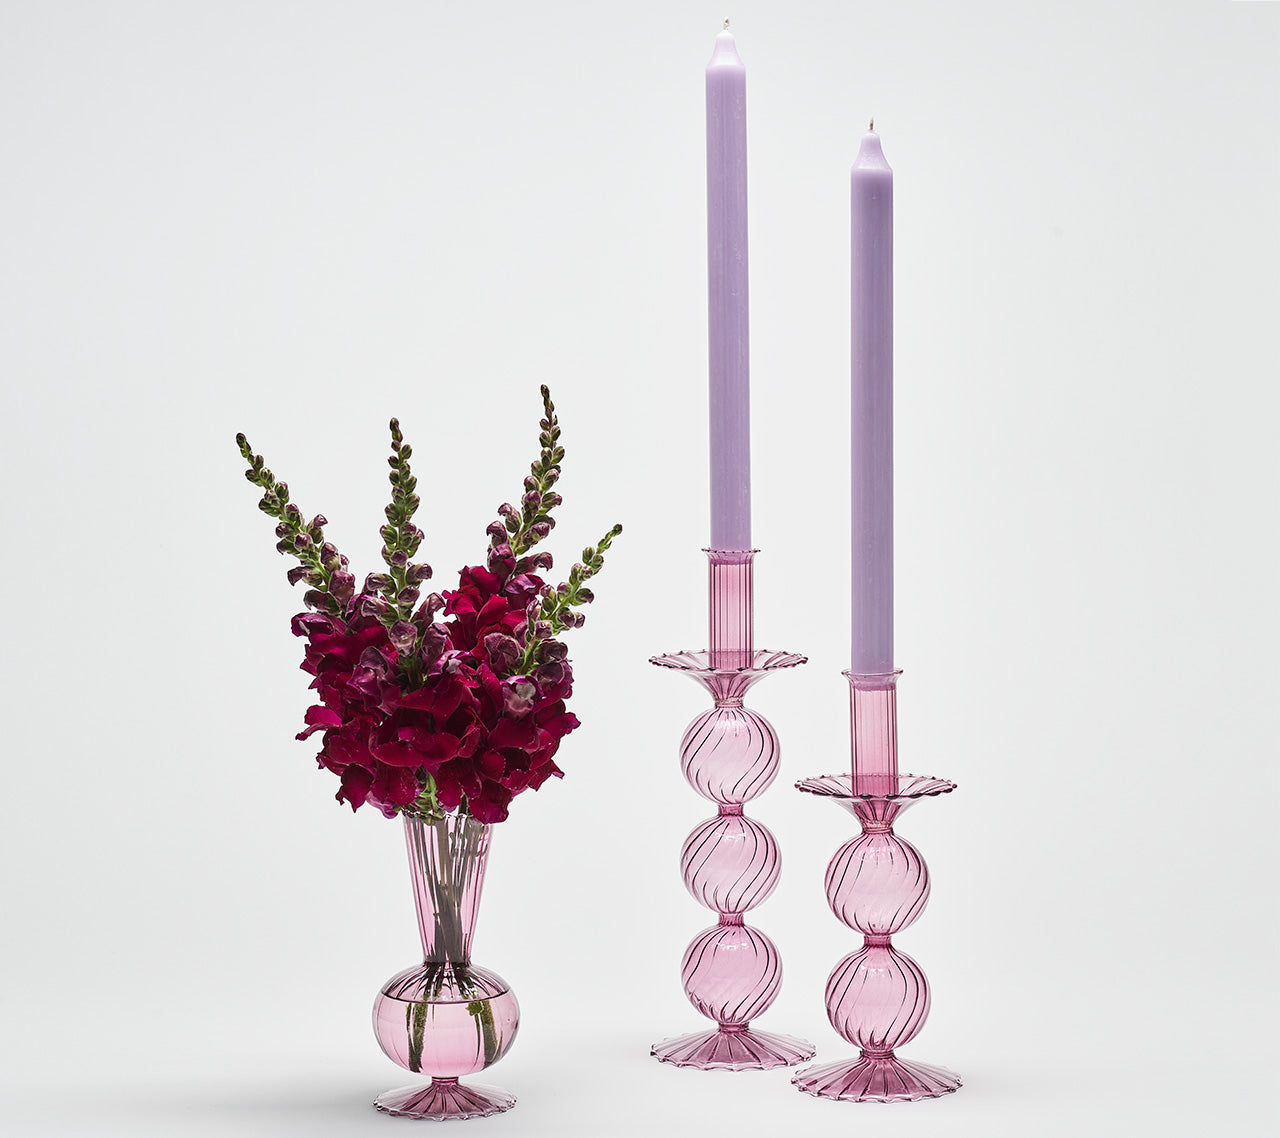 A Tess Bud Vase in lavender next to two Bella Candle Holders of the same color